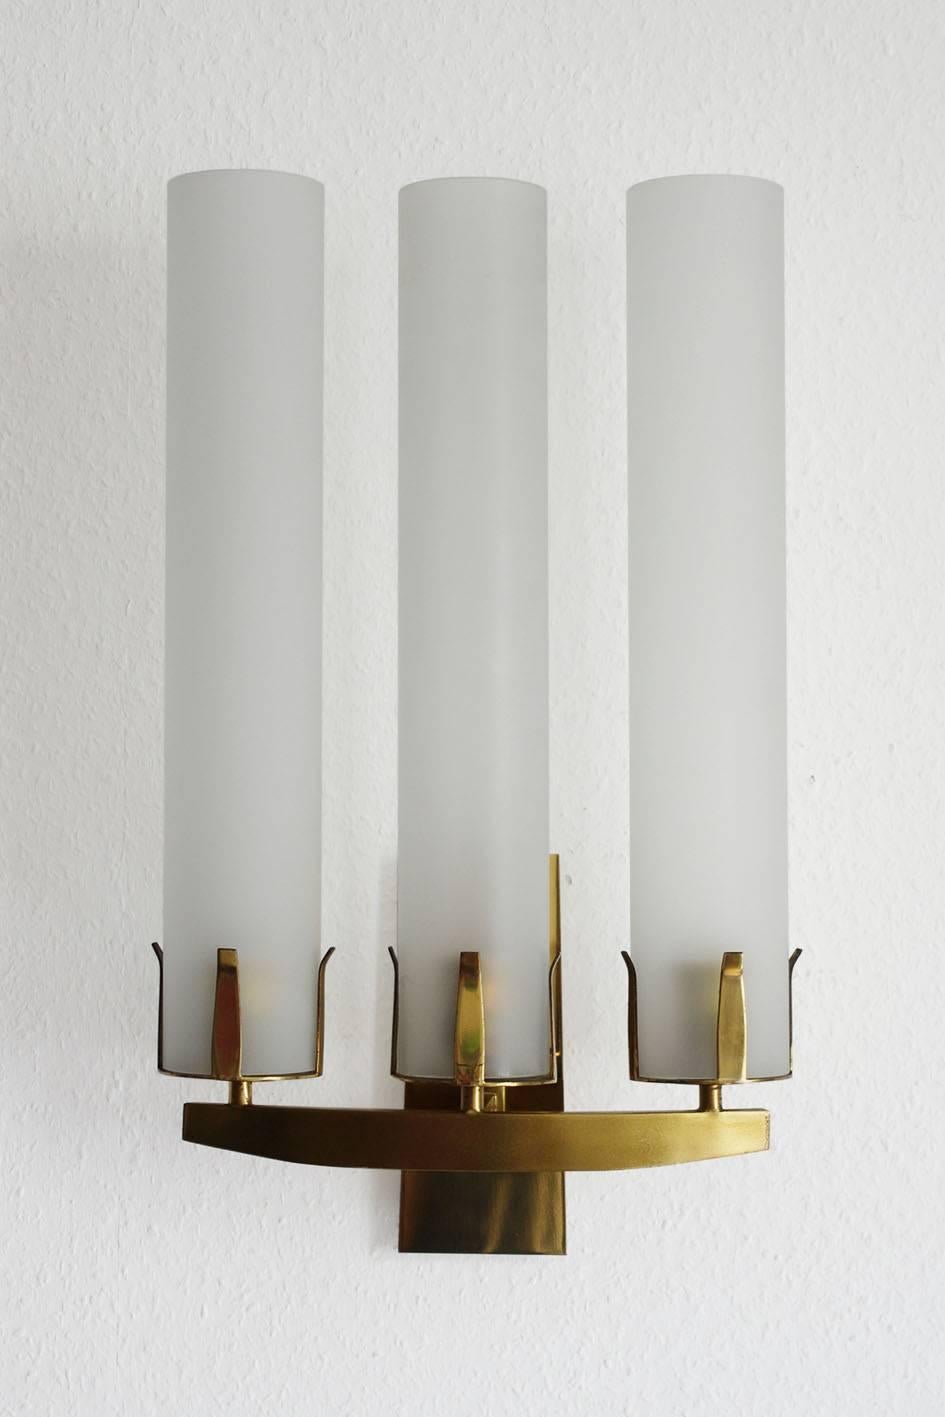 One of seven rare huge glass and solid brass wall light.
France, 1950s.

Lamp sockes: 3x E27 (US E26).